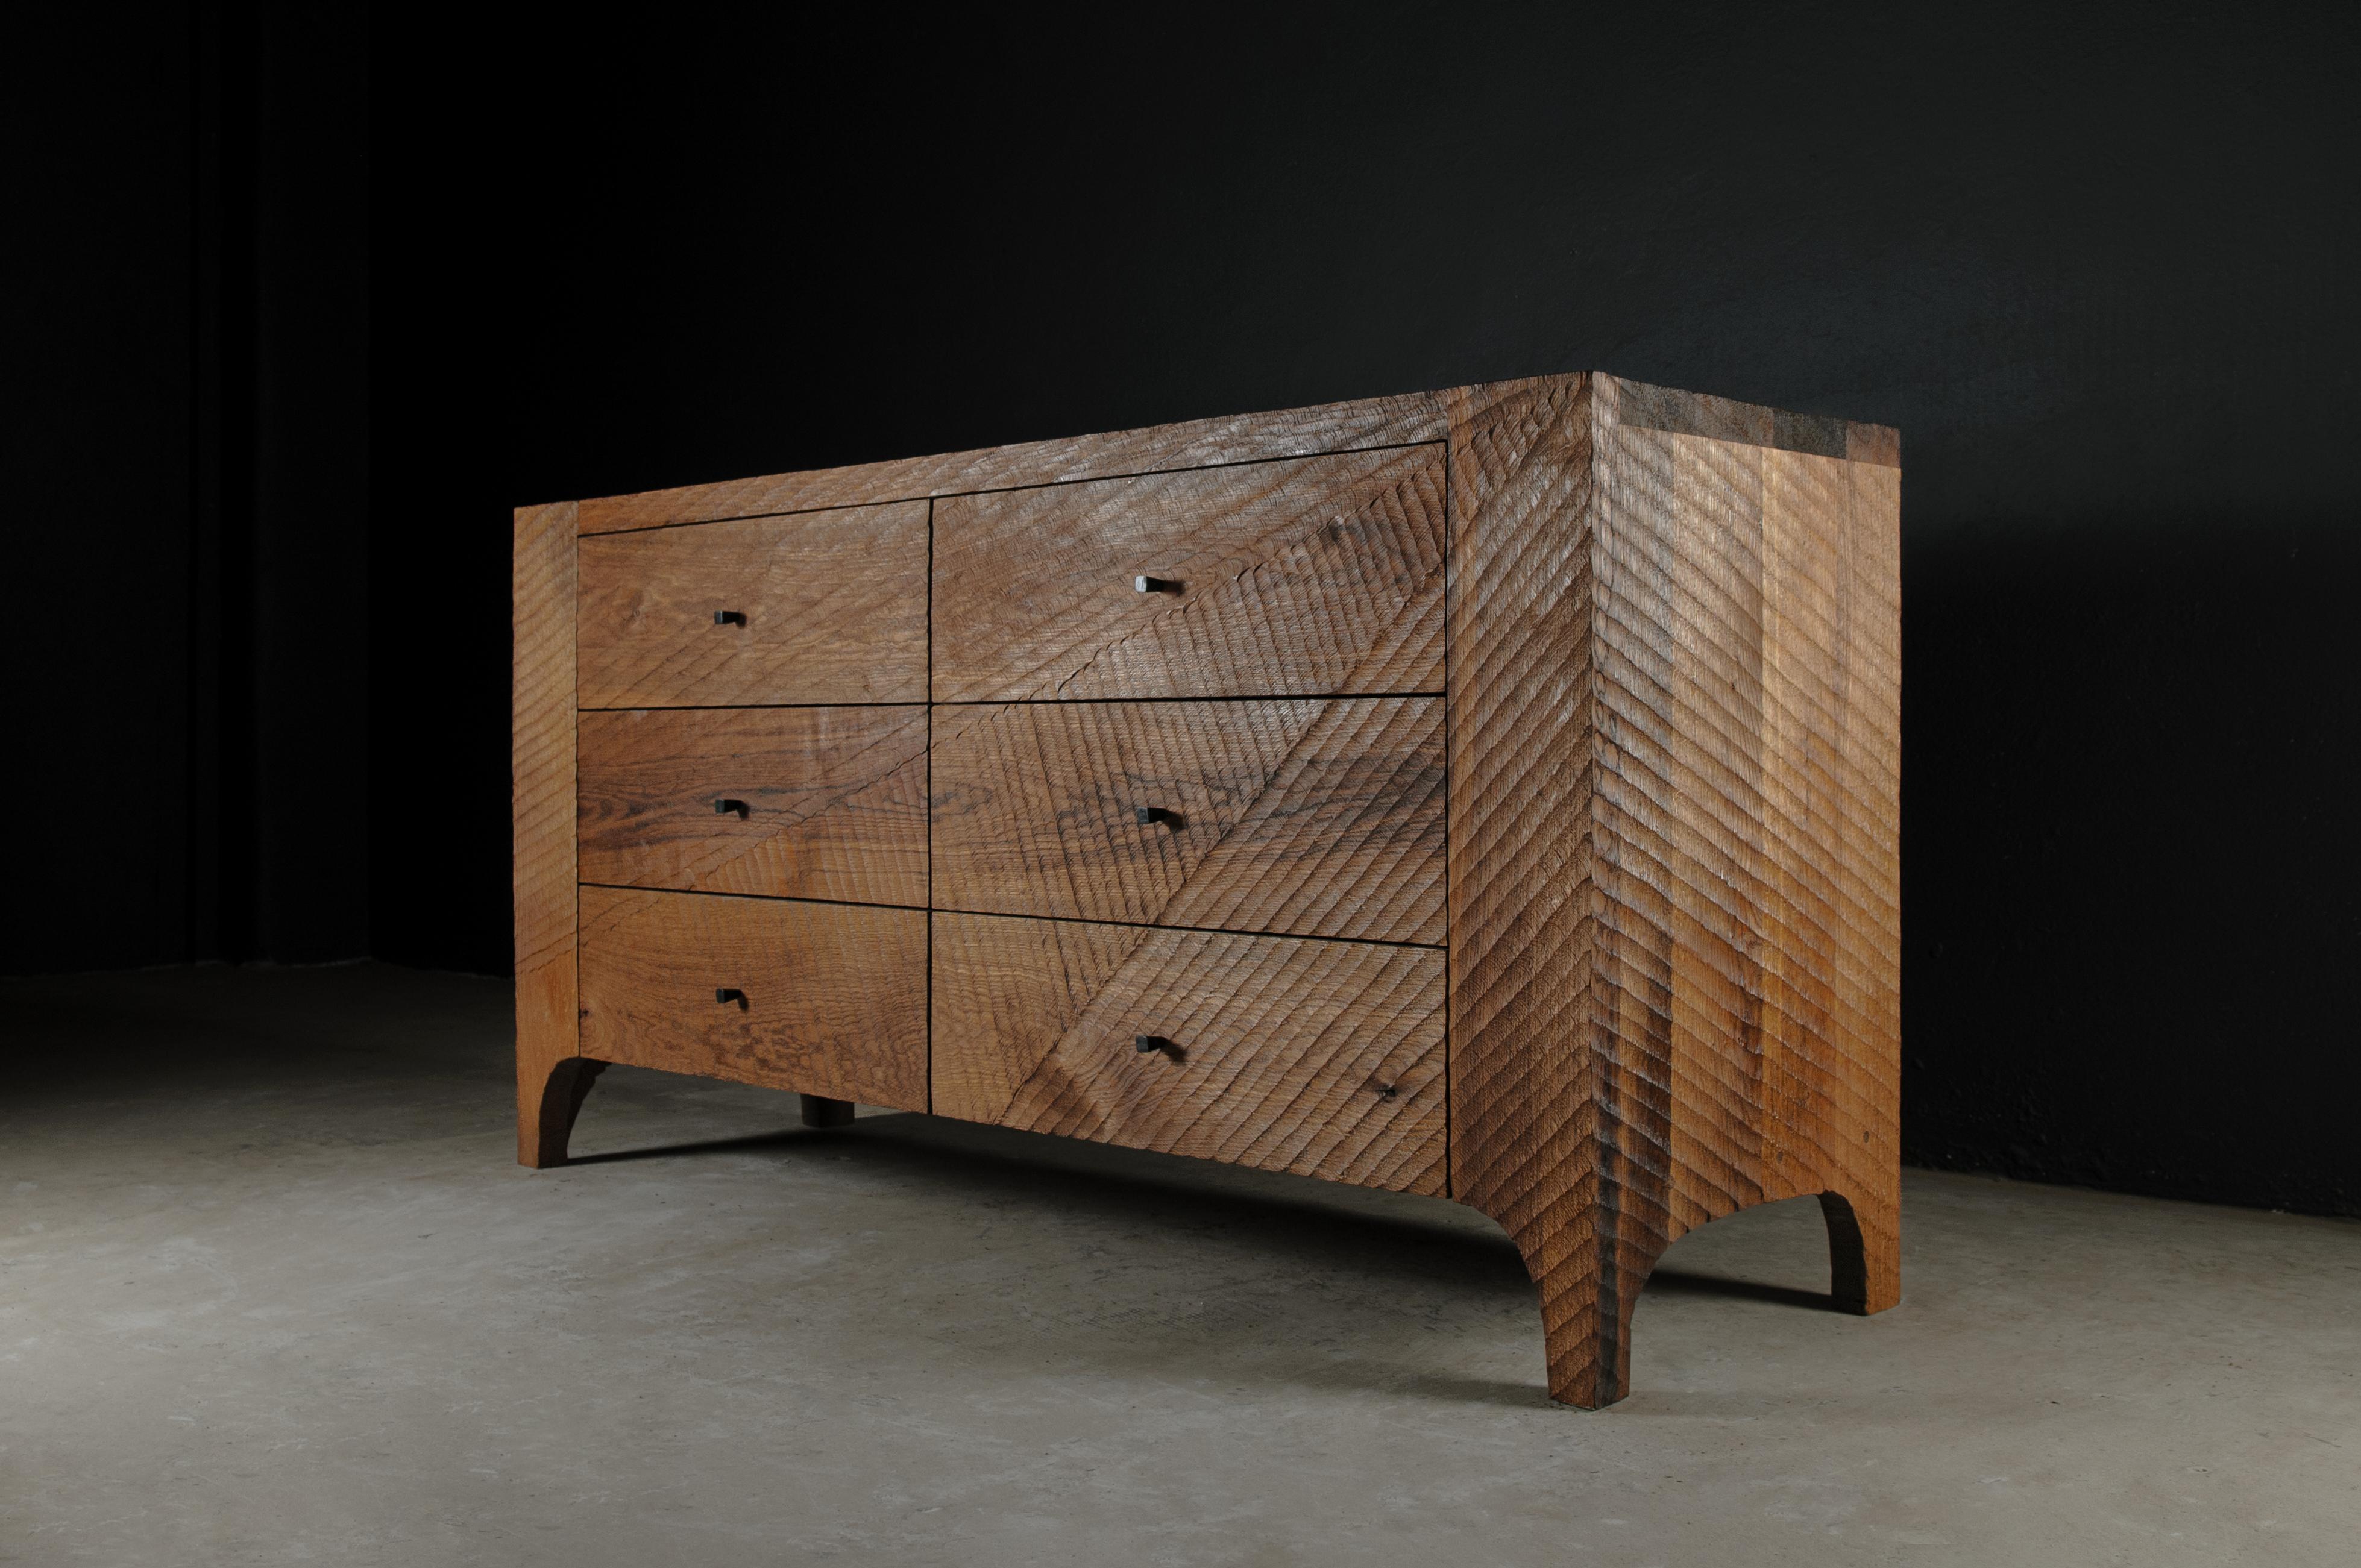 Contemporary Brutalist dresser in solid oak 'Custom Size'

Dimensions: Depth 51 cm x Width 167 cm x Height 84 cm

Dresser / cabinet
Sculpted wood (solid oak)
Finish: wavy, medium

Warm furniture’s made by designers from 